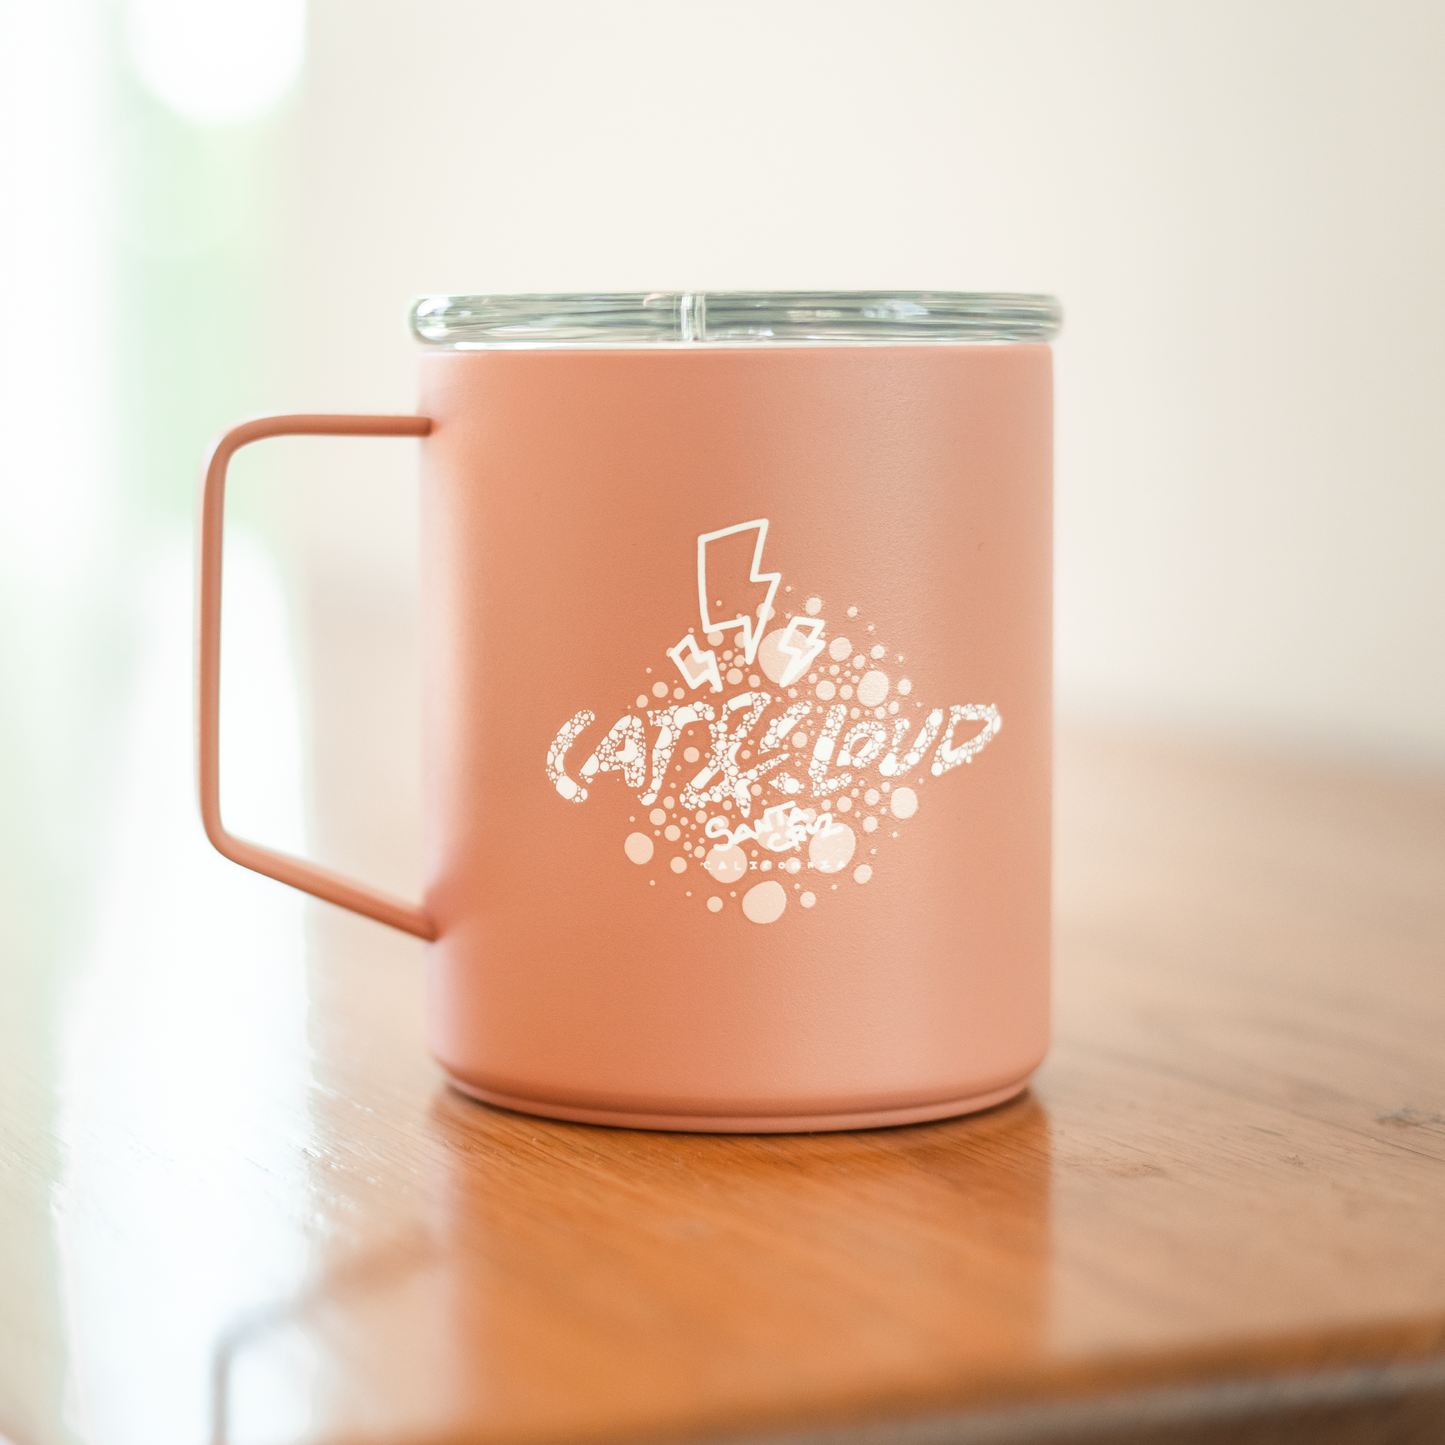 The Cozy Camp Cup